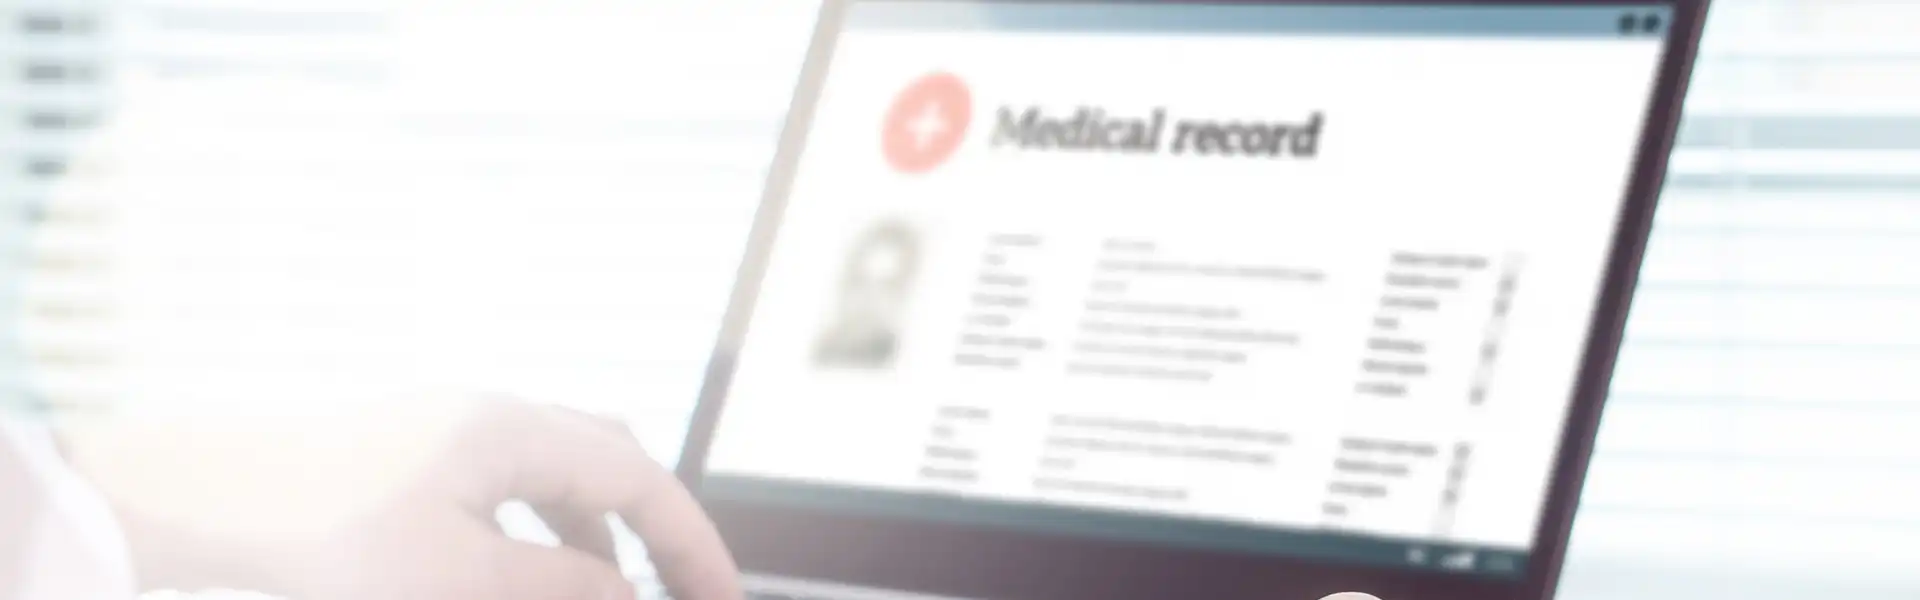 medical-record-view-on-laptop